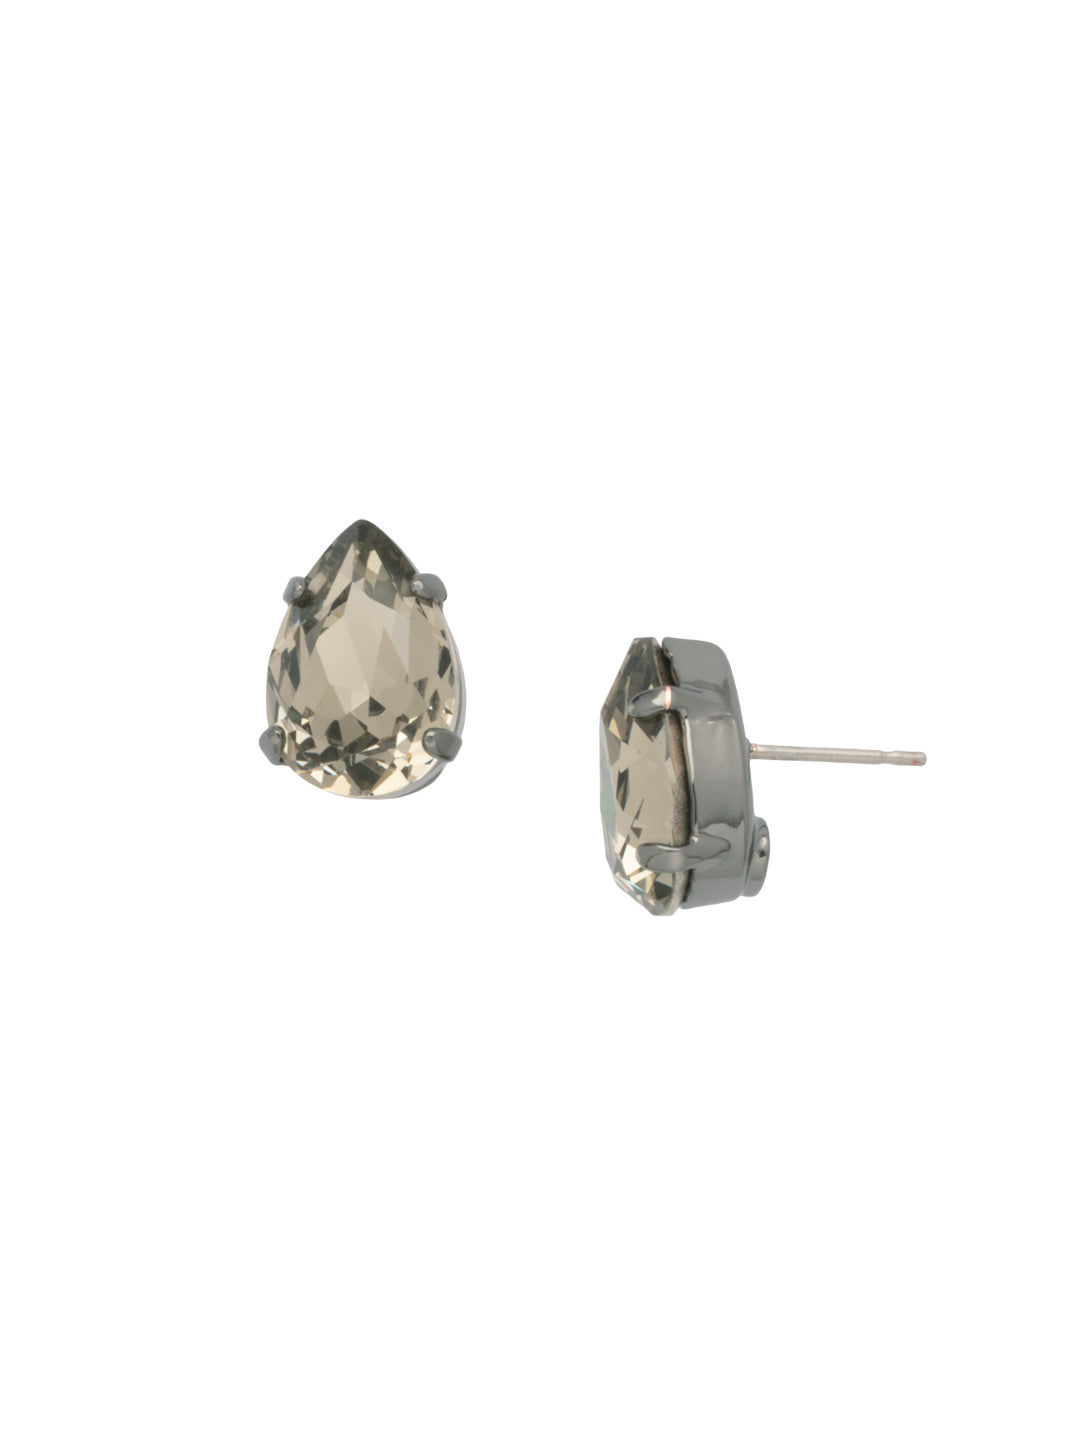 Ginnie Stud Earrings - ECR115GMBD - <p>A beautiful basic stud. These classic single teardrop post earrings are perfect for any occasion, especially the everyday look. A timeless treasure that will sparkle season after season. From Sorrelli's Black Diamond collection in our Gun Metal finish.</p>